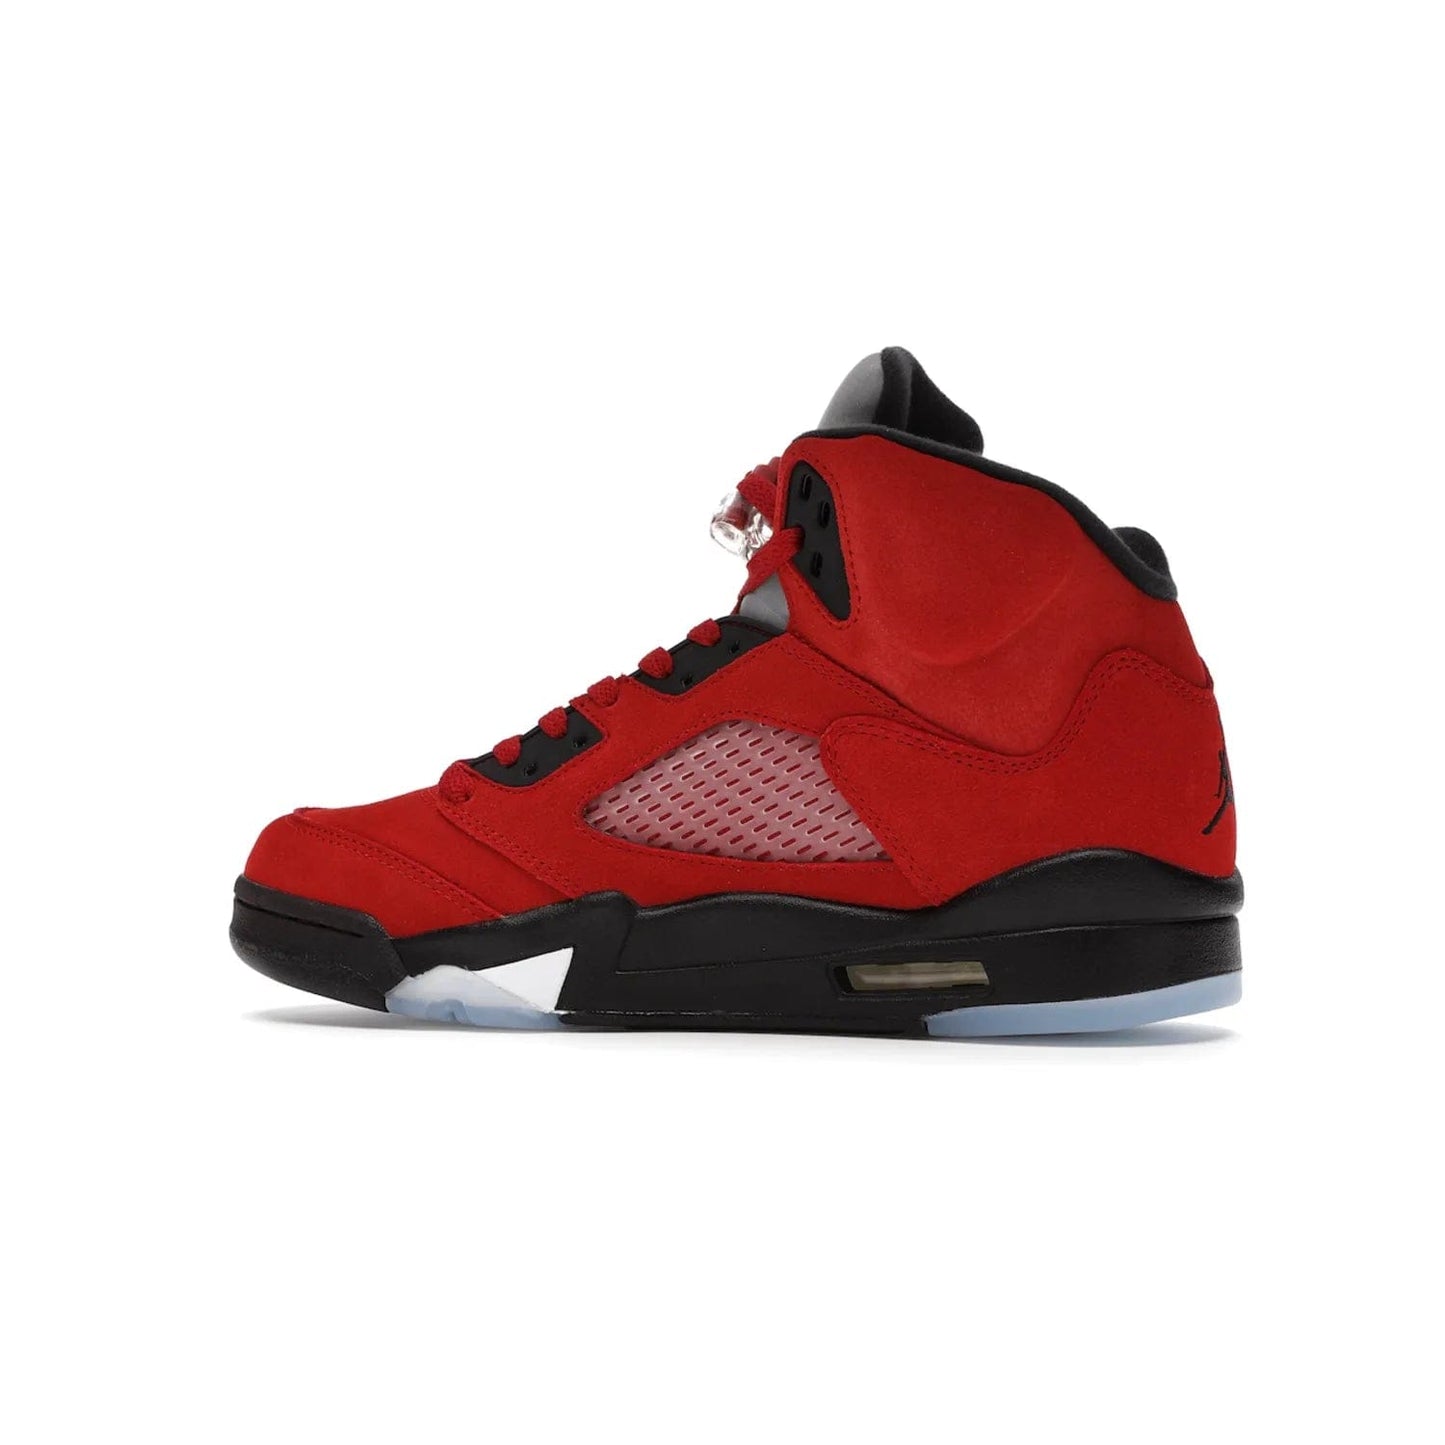 Jordan 5 Retro Raging Bull Red (2021) - Image 21 - Only at www.BallersClubKickz.com - Get ready for the 2021 stand-alone release of the Air Jordan 5 Raging Bulls! This all-suede upper combines luxe details like a Jumpman logo, red & black "23" embroidery and shark tooth detailing, atop a black midsole. Don't miss out - release date in April 2021 for $190.